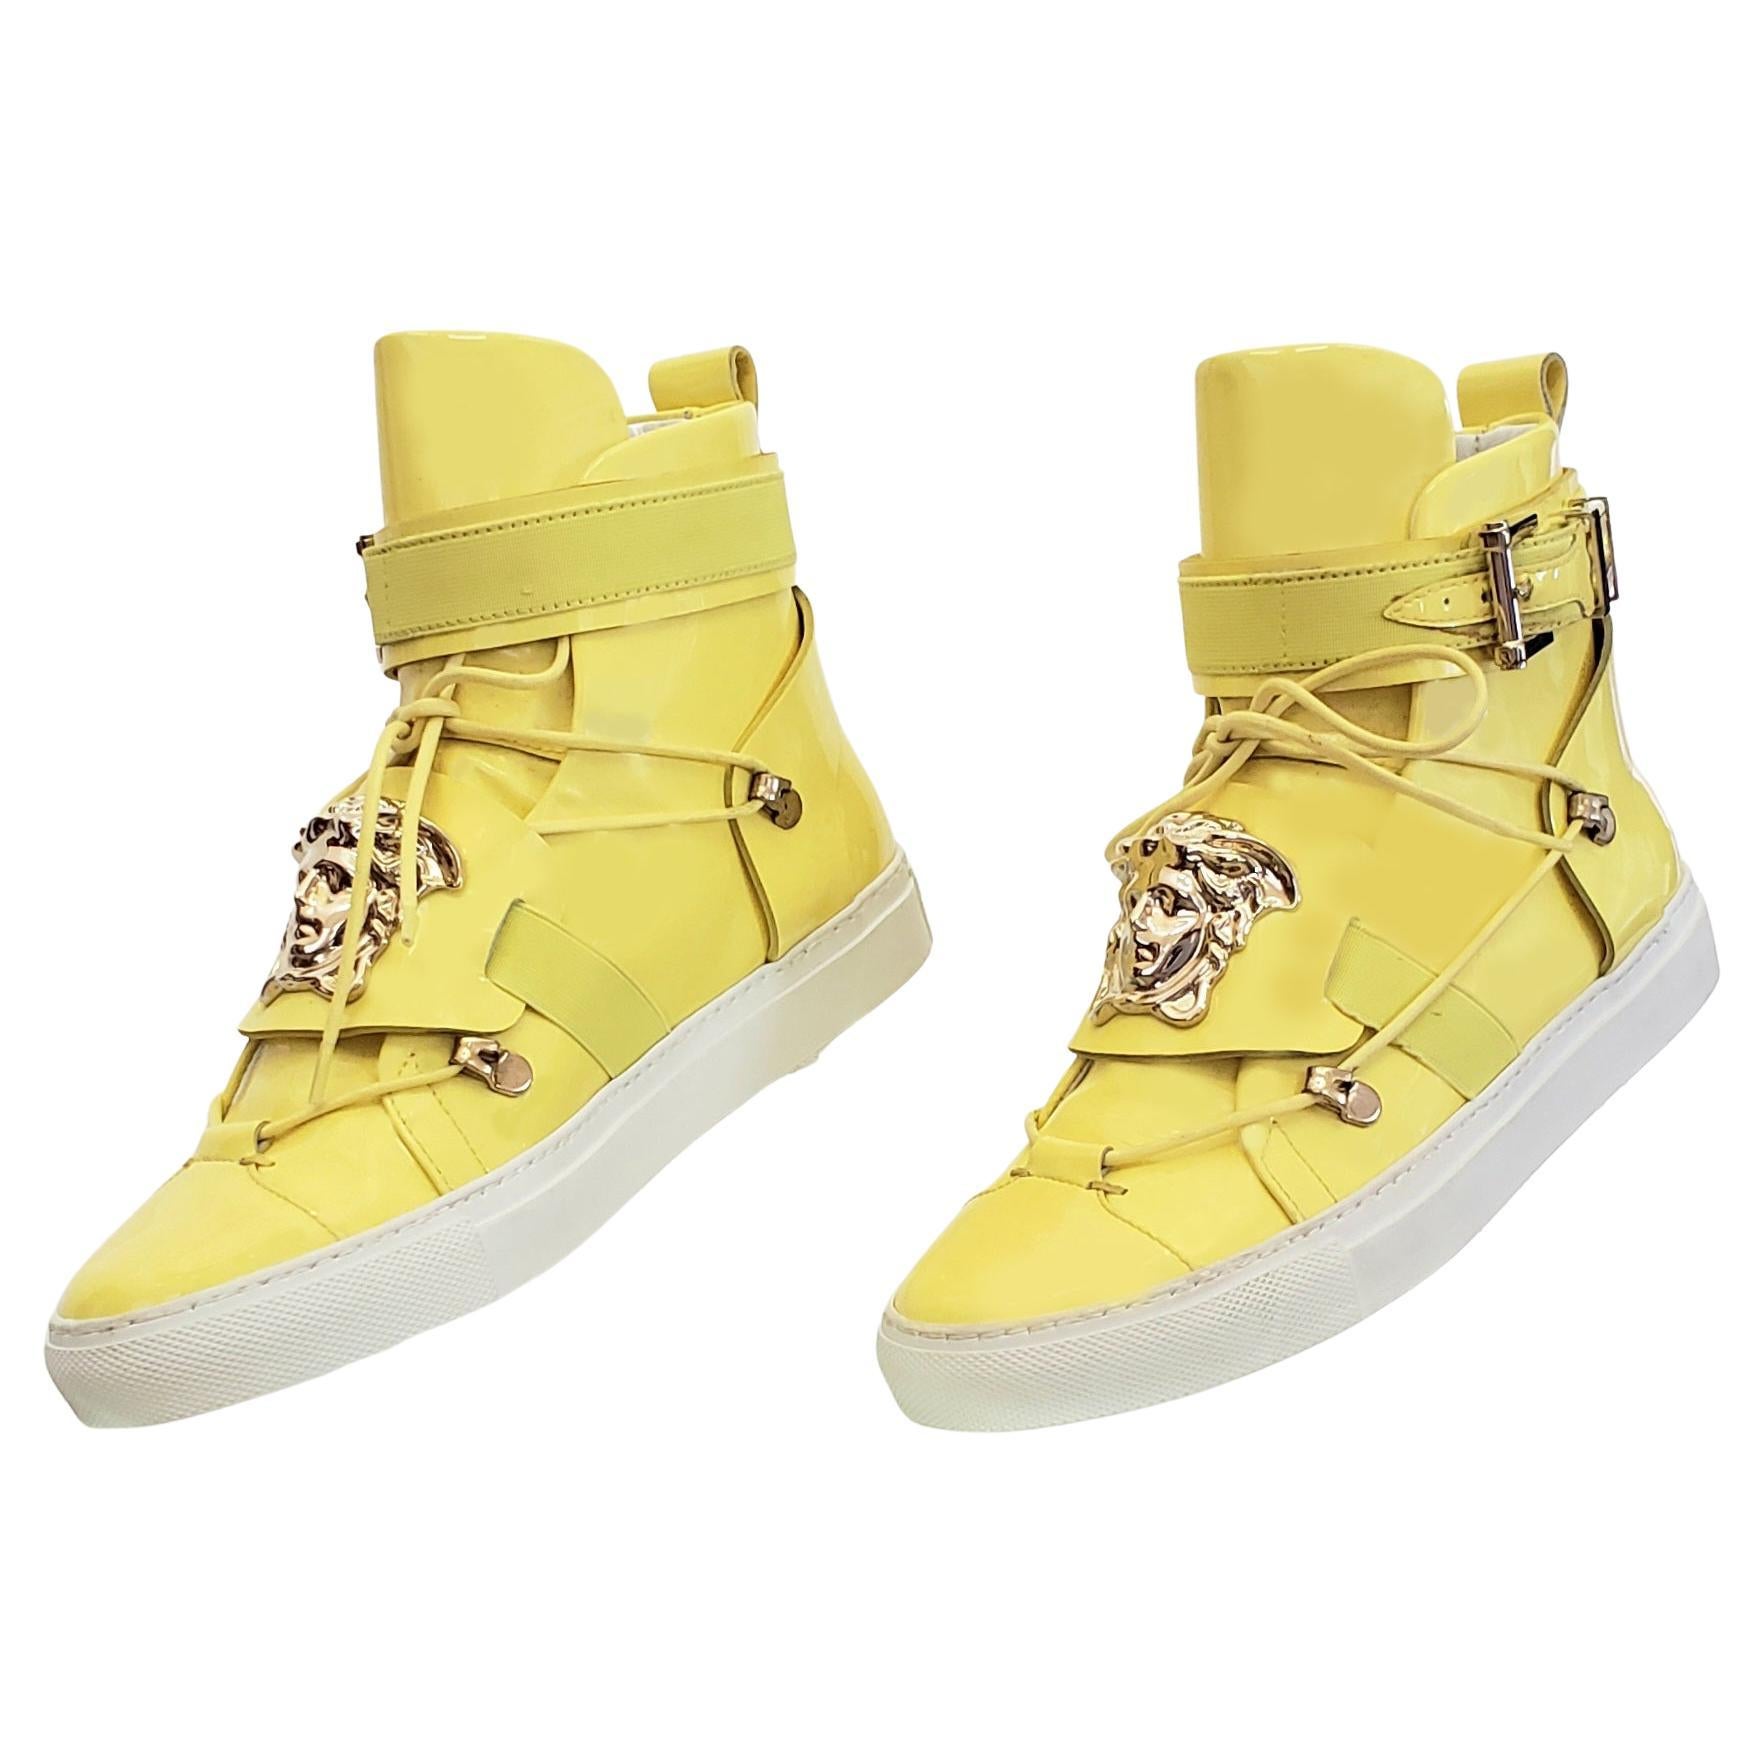 NEW VERSACE YELLOW PATENT LEATHER SNEAKERS w / GOLD 3D MEDUSA HEAD 36 - 6